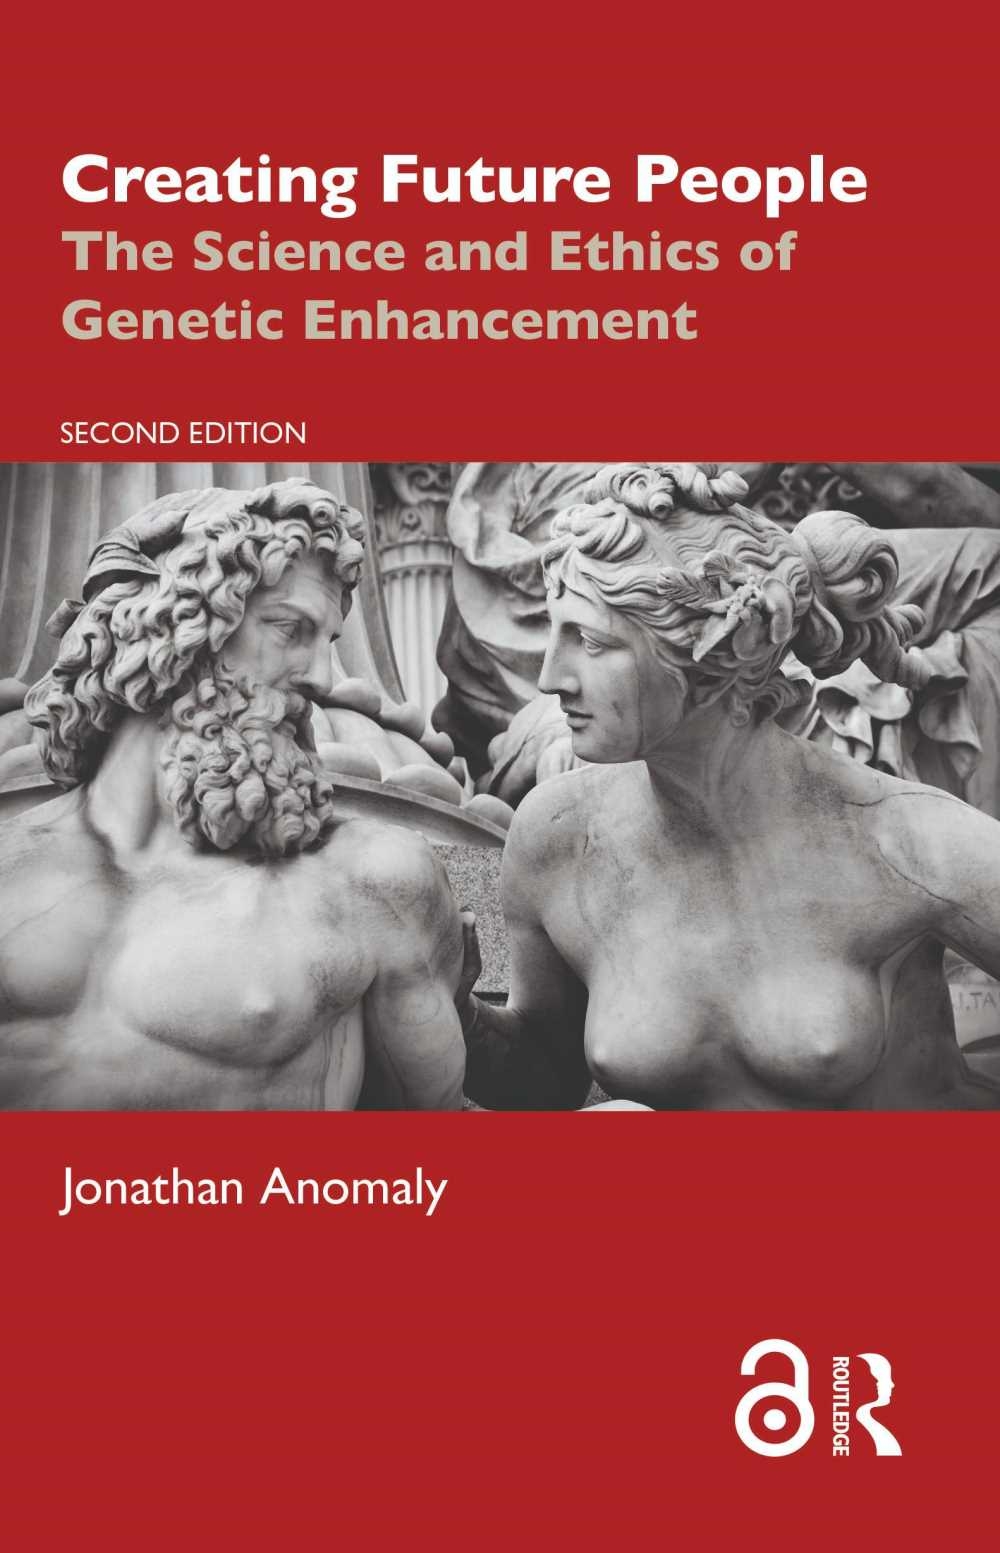 Creating Future People: The Science and Ethics of Genetic Enhancement